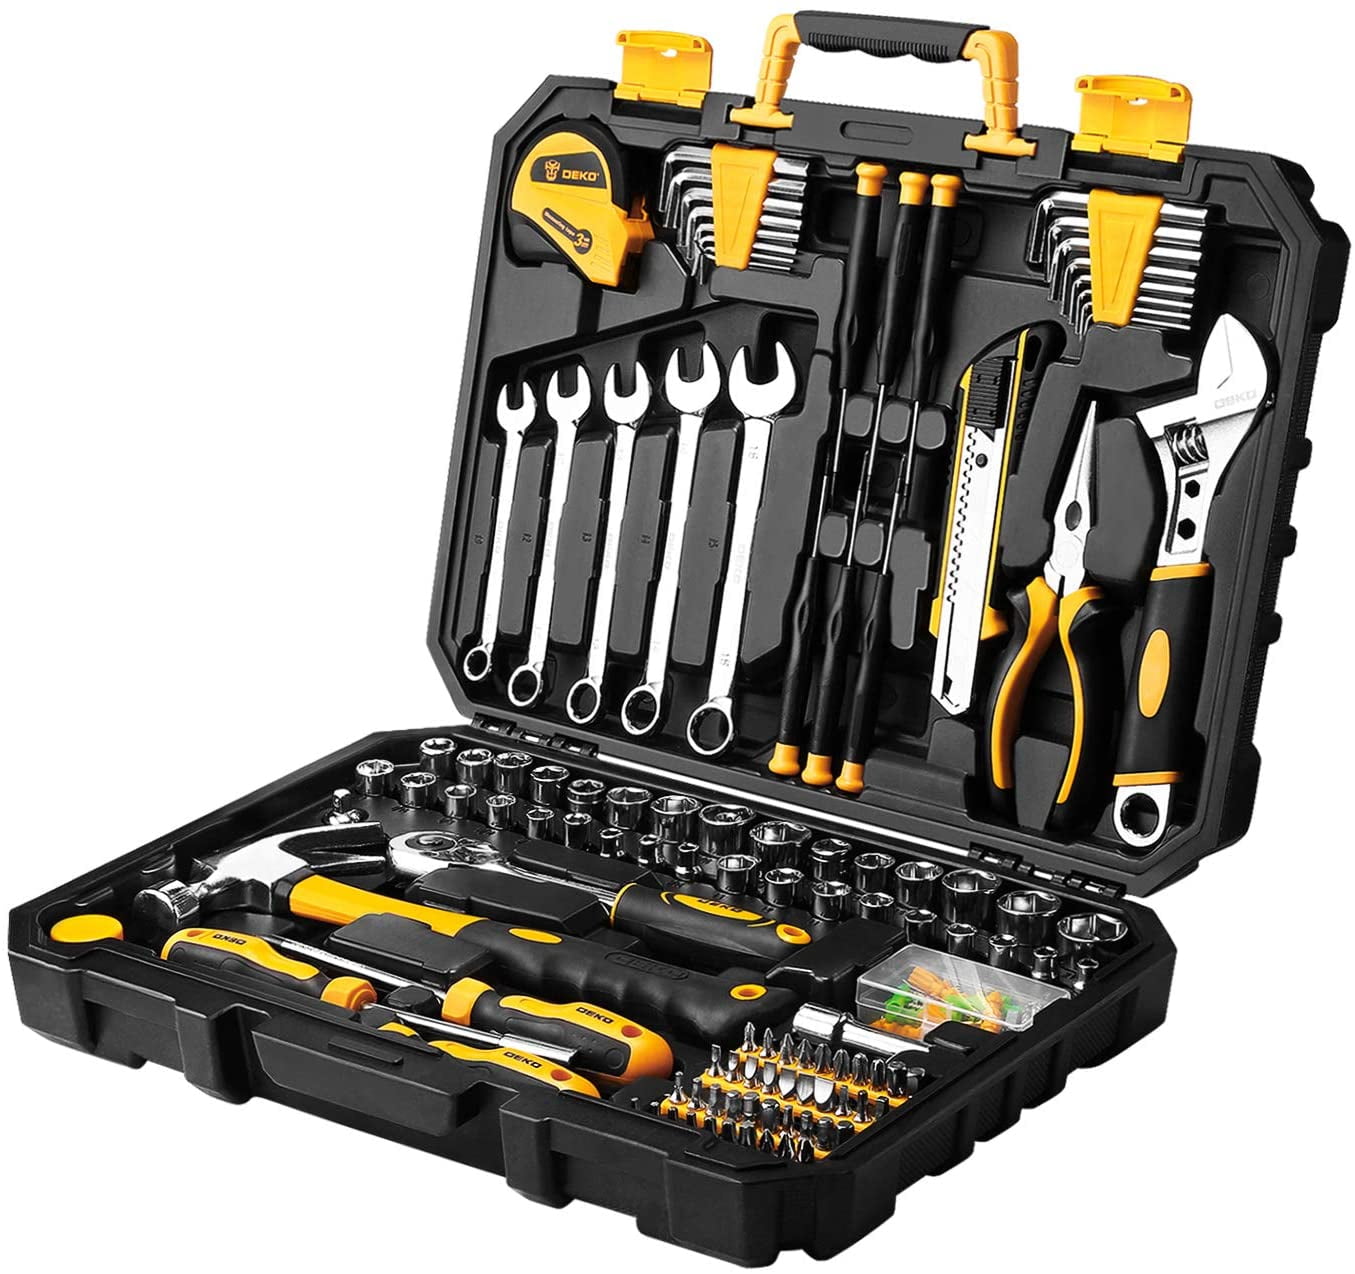 General Home/Auto Repair Tool Set Perfect for Homeowner Handyman General Household Tool Kit KingTool 325 Piece Home Repair Tool Kit Toolbox Storage Case with Drawer Diyer 